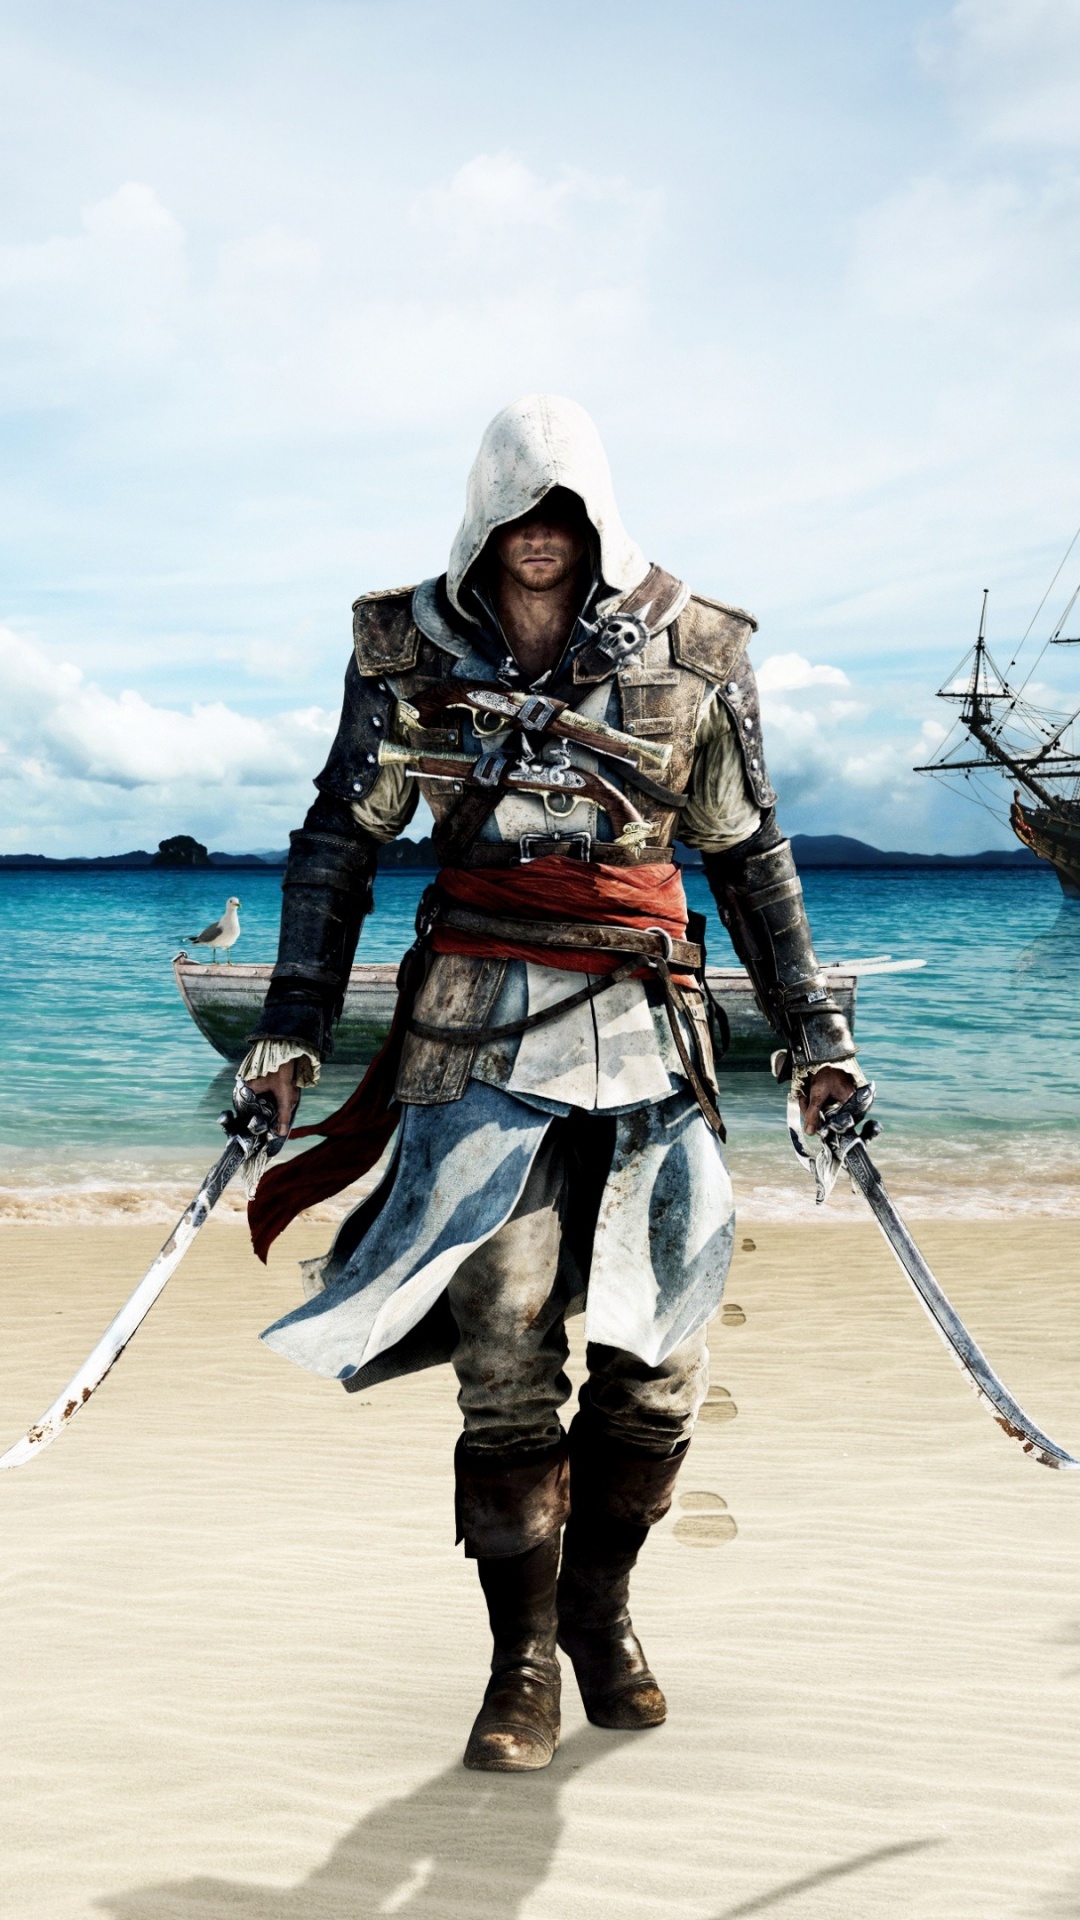 Tourisme, Mer, Vacances, Voyage, Assassins Creed III. Wallpaper in 1080x1920 Resolution